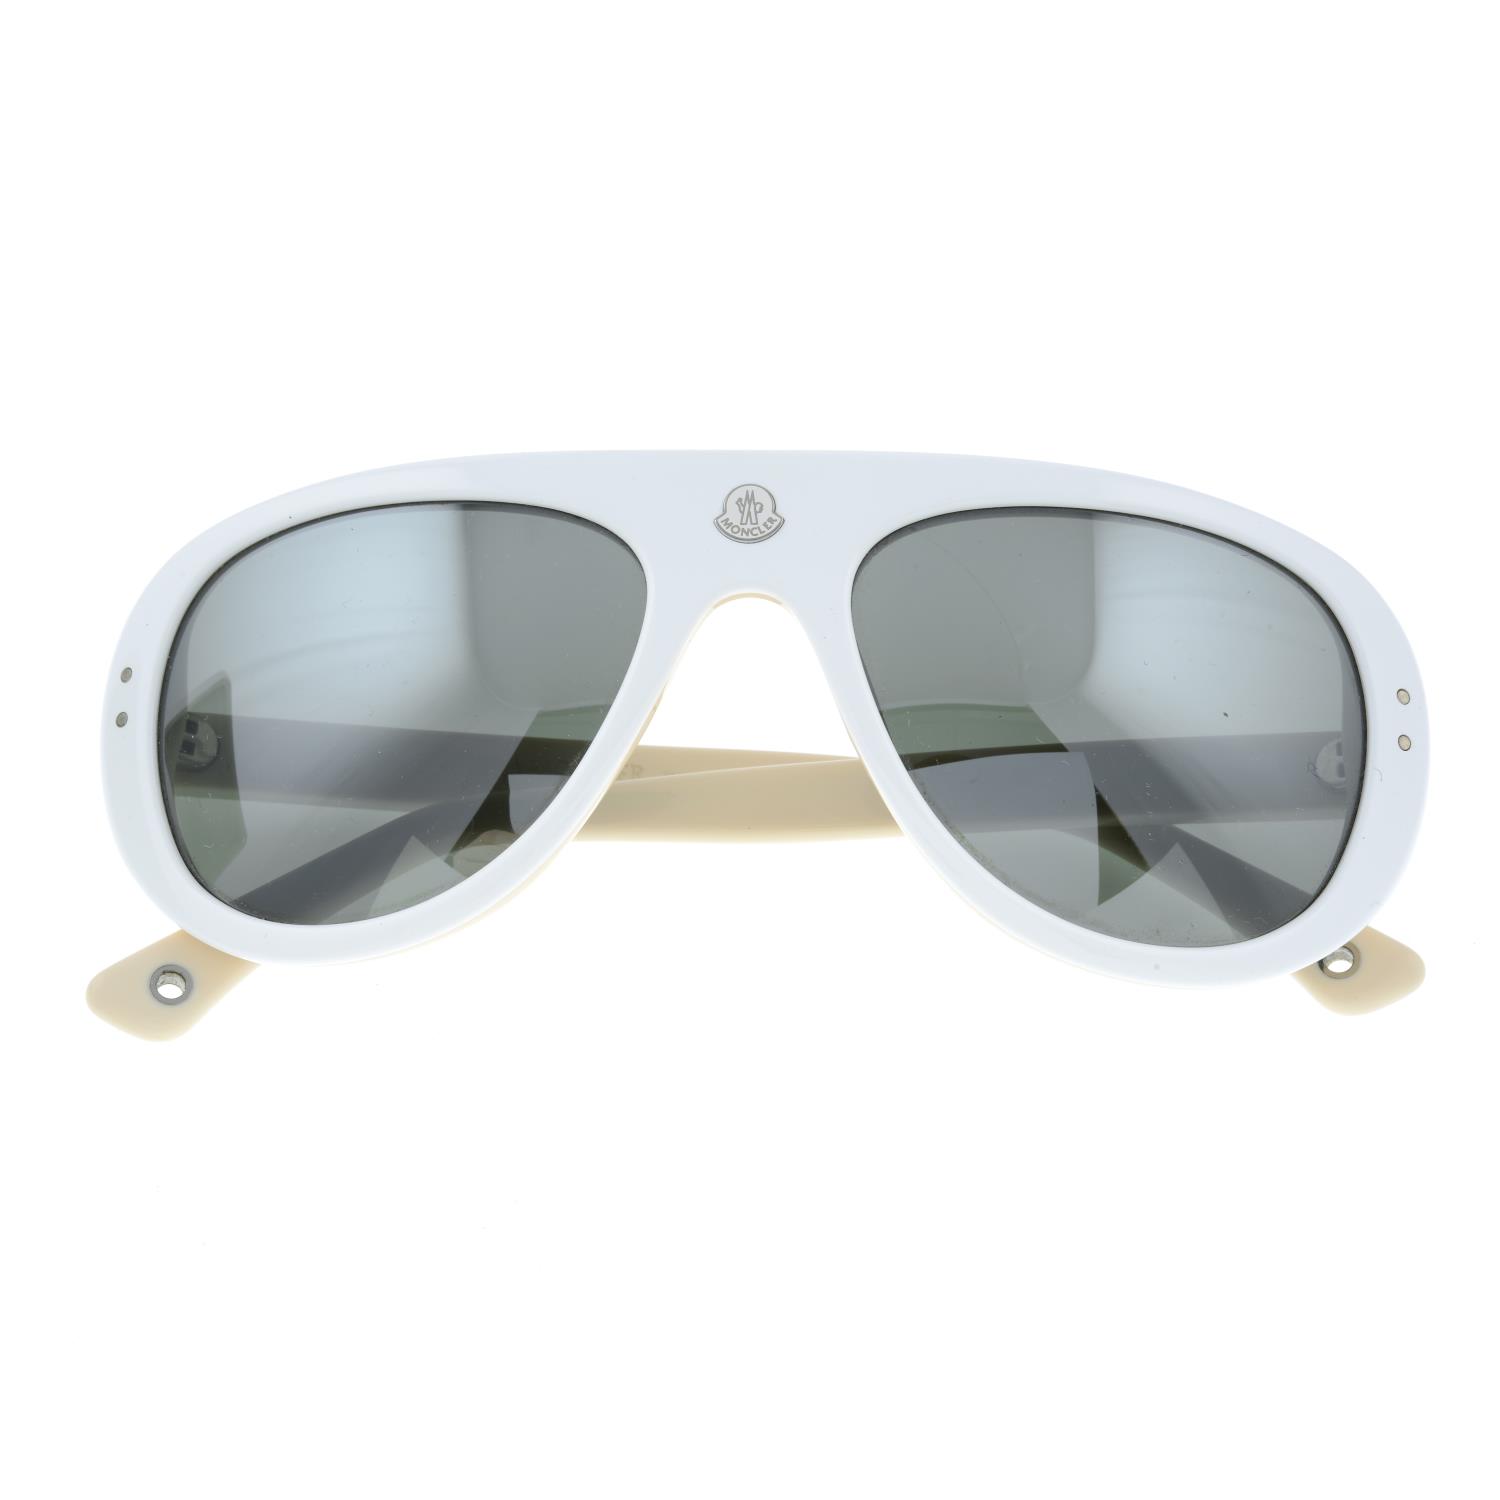 MONCLER - a pair of white sunglasses.